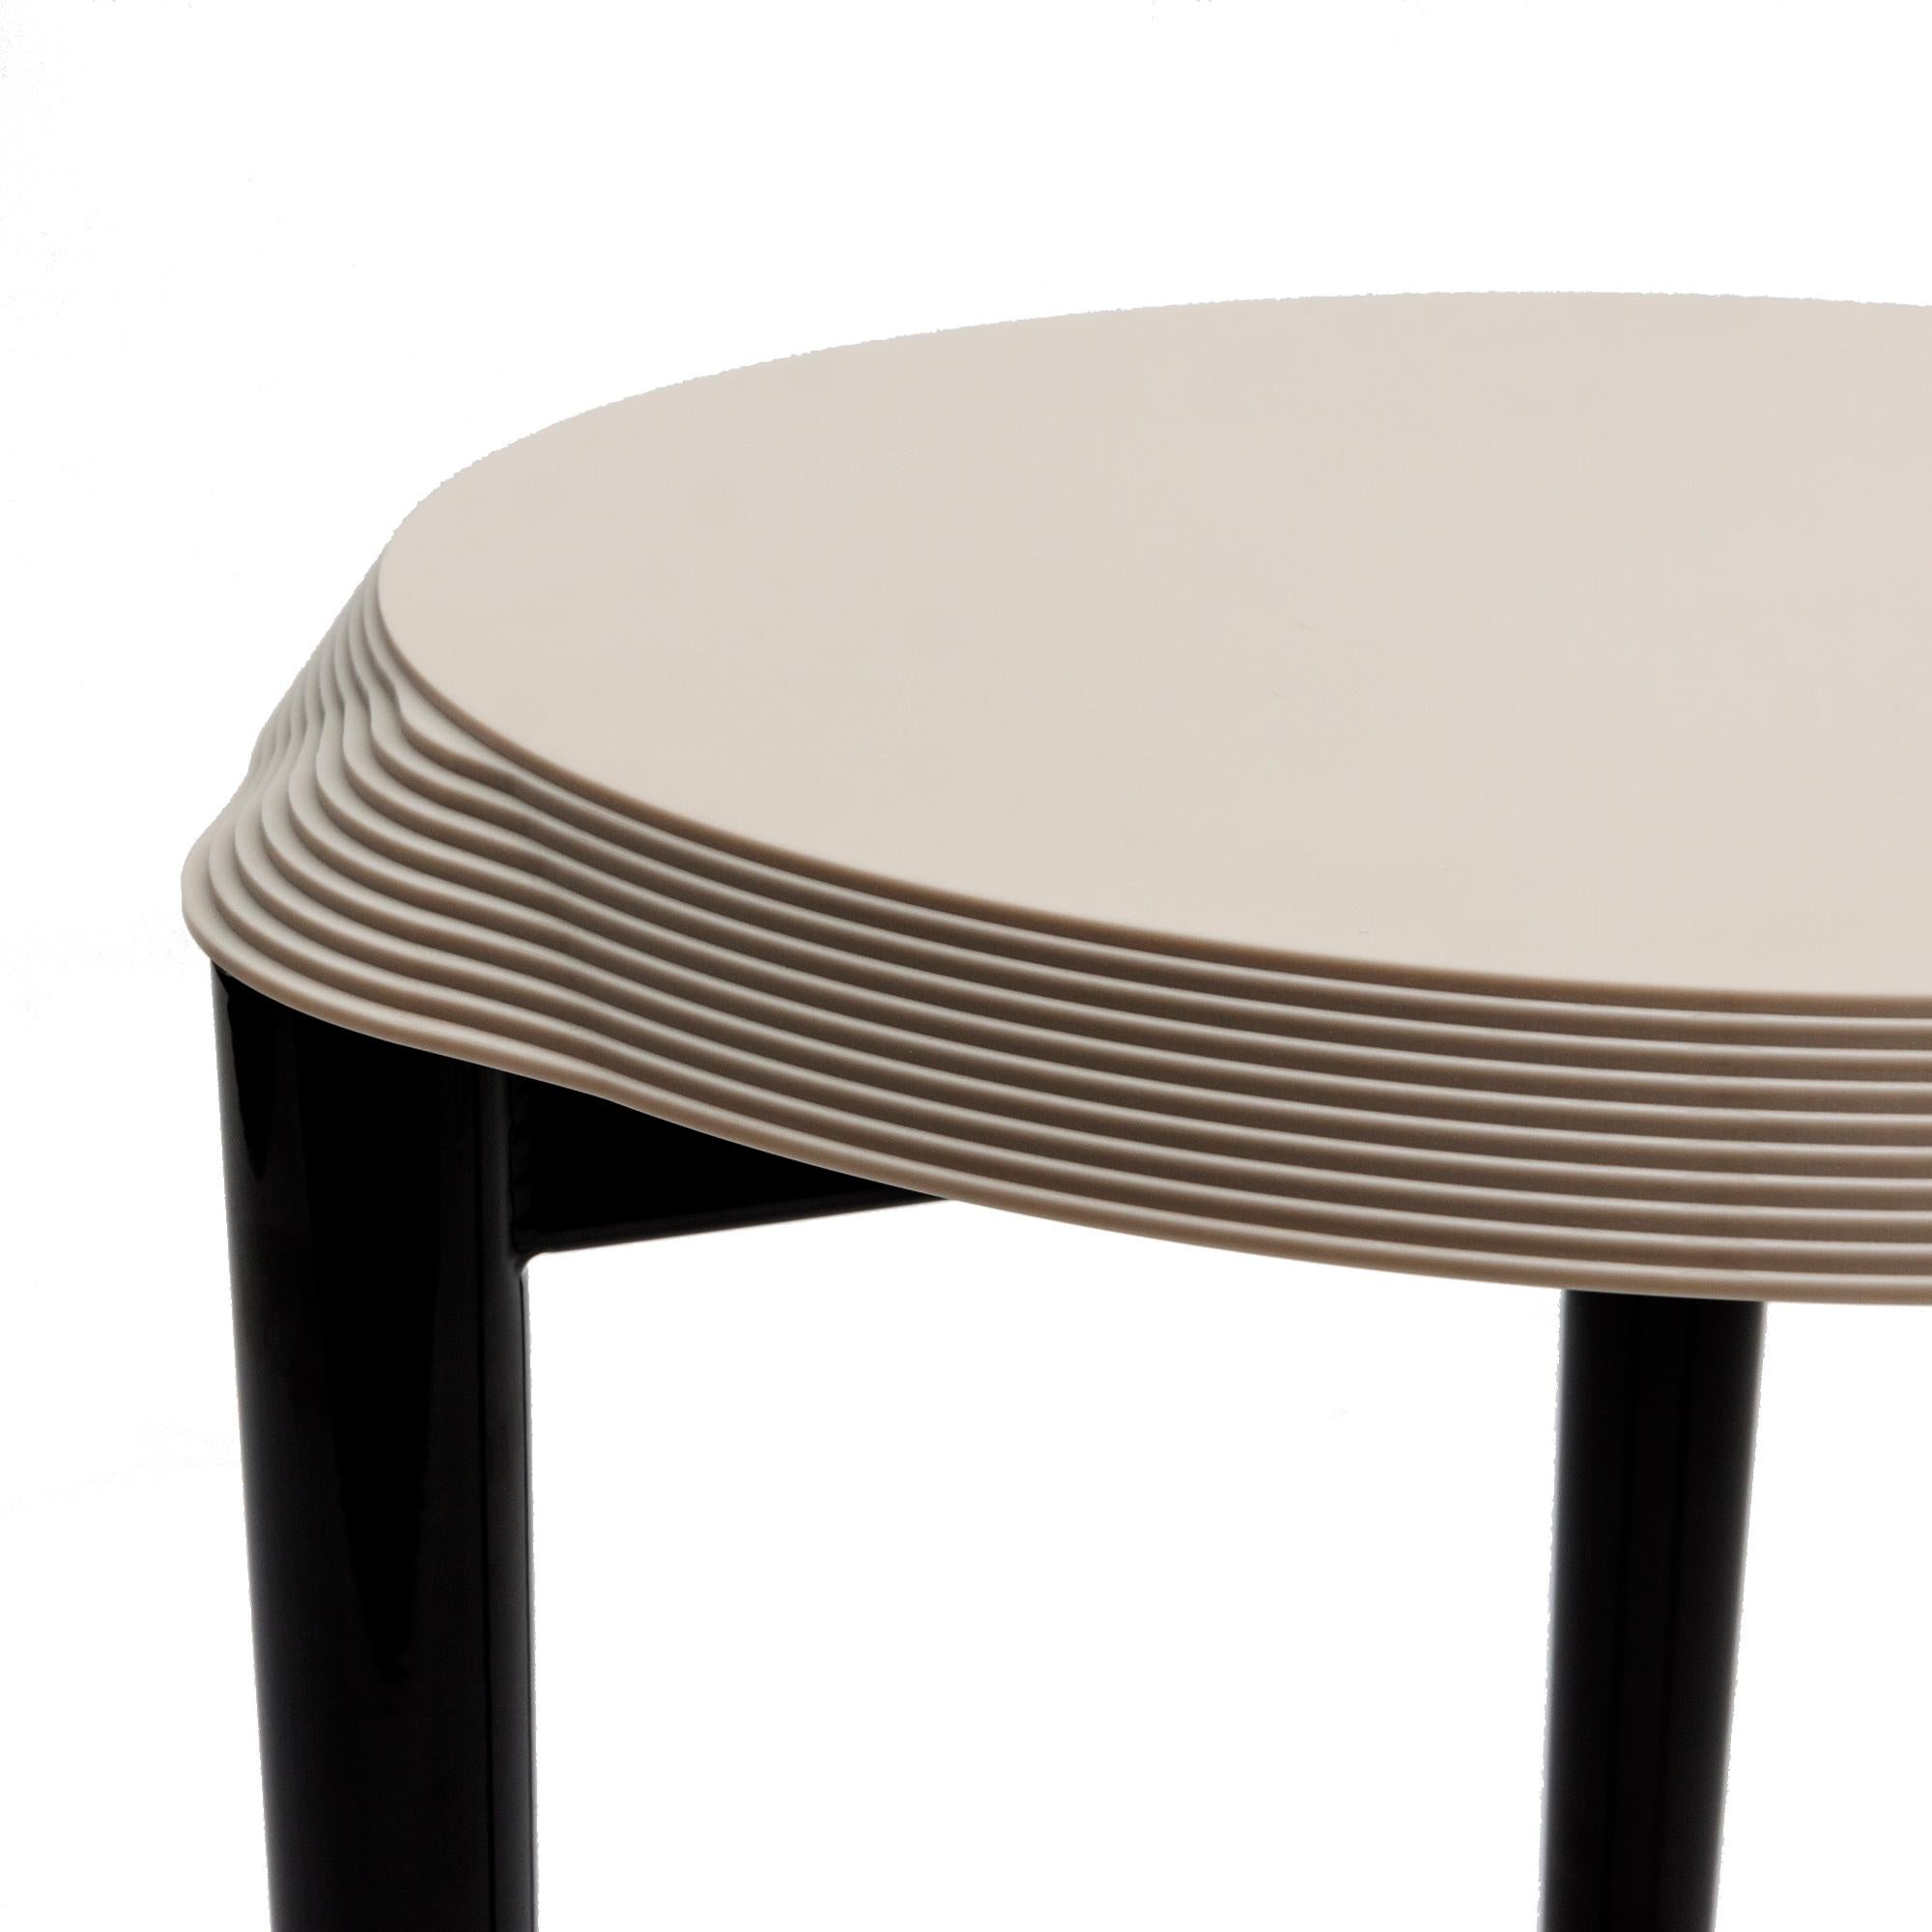 The ‘Jump’ stools are characterized by circular seats of Corian material, supported by three metal legs.
The circular seats are worked with slight differences of thickness that gradually increase and follow the circularity of the legs.
The low